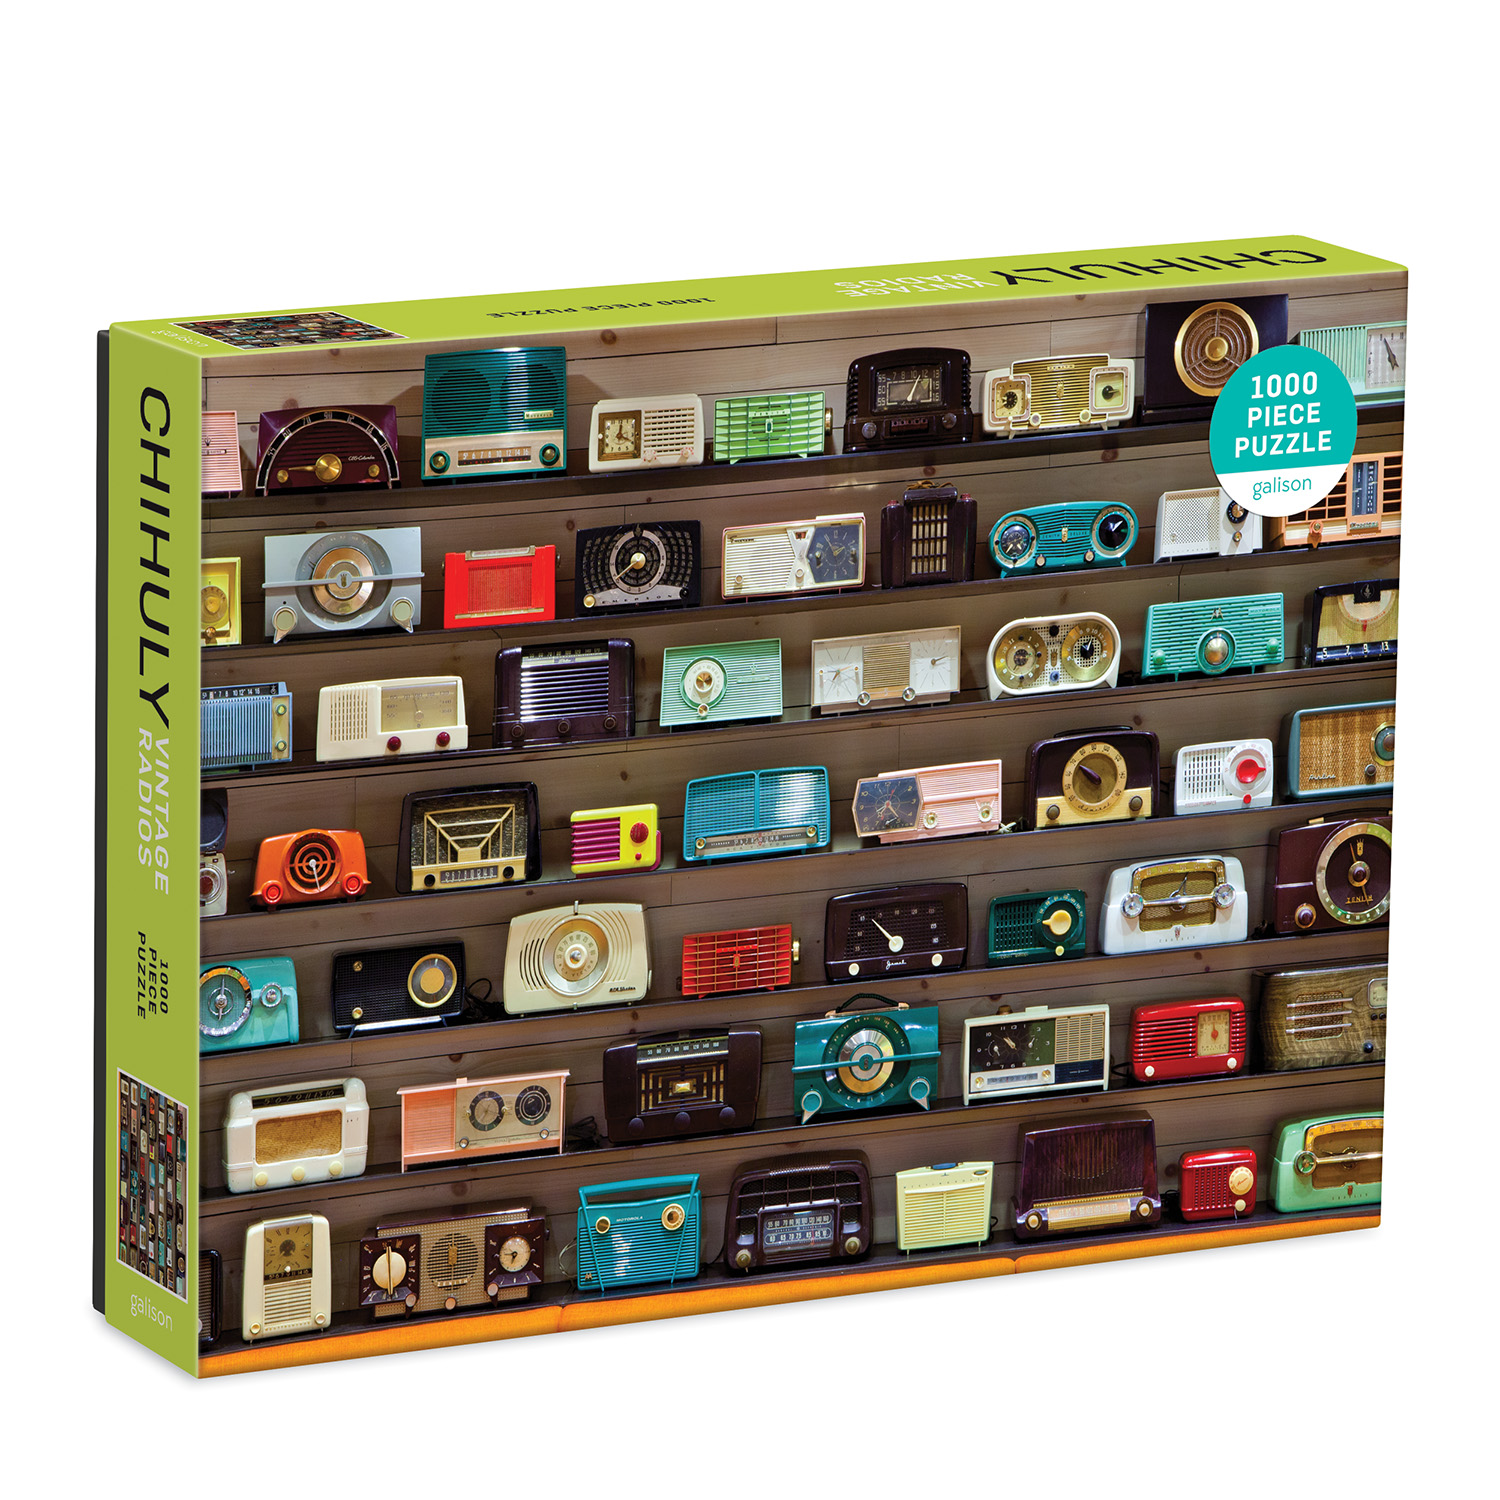 Chihuly Vintage Clock Radio 1000-piece Puzzle